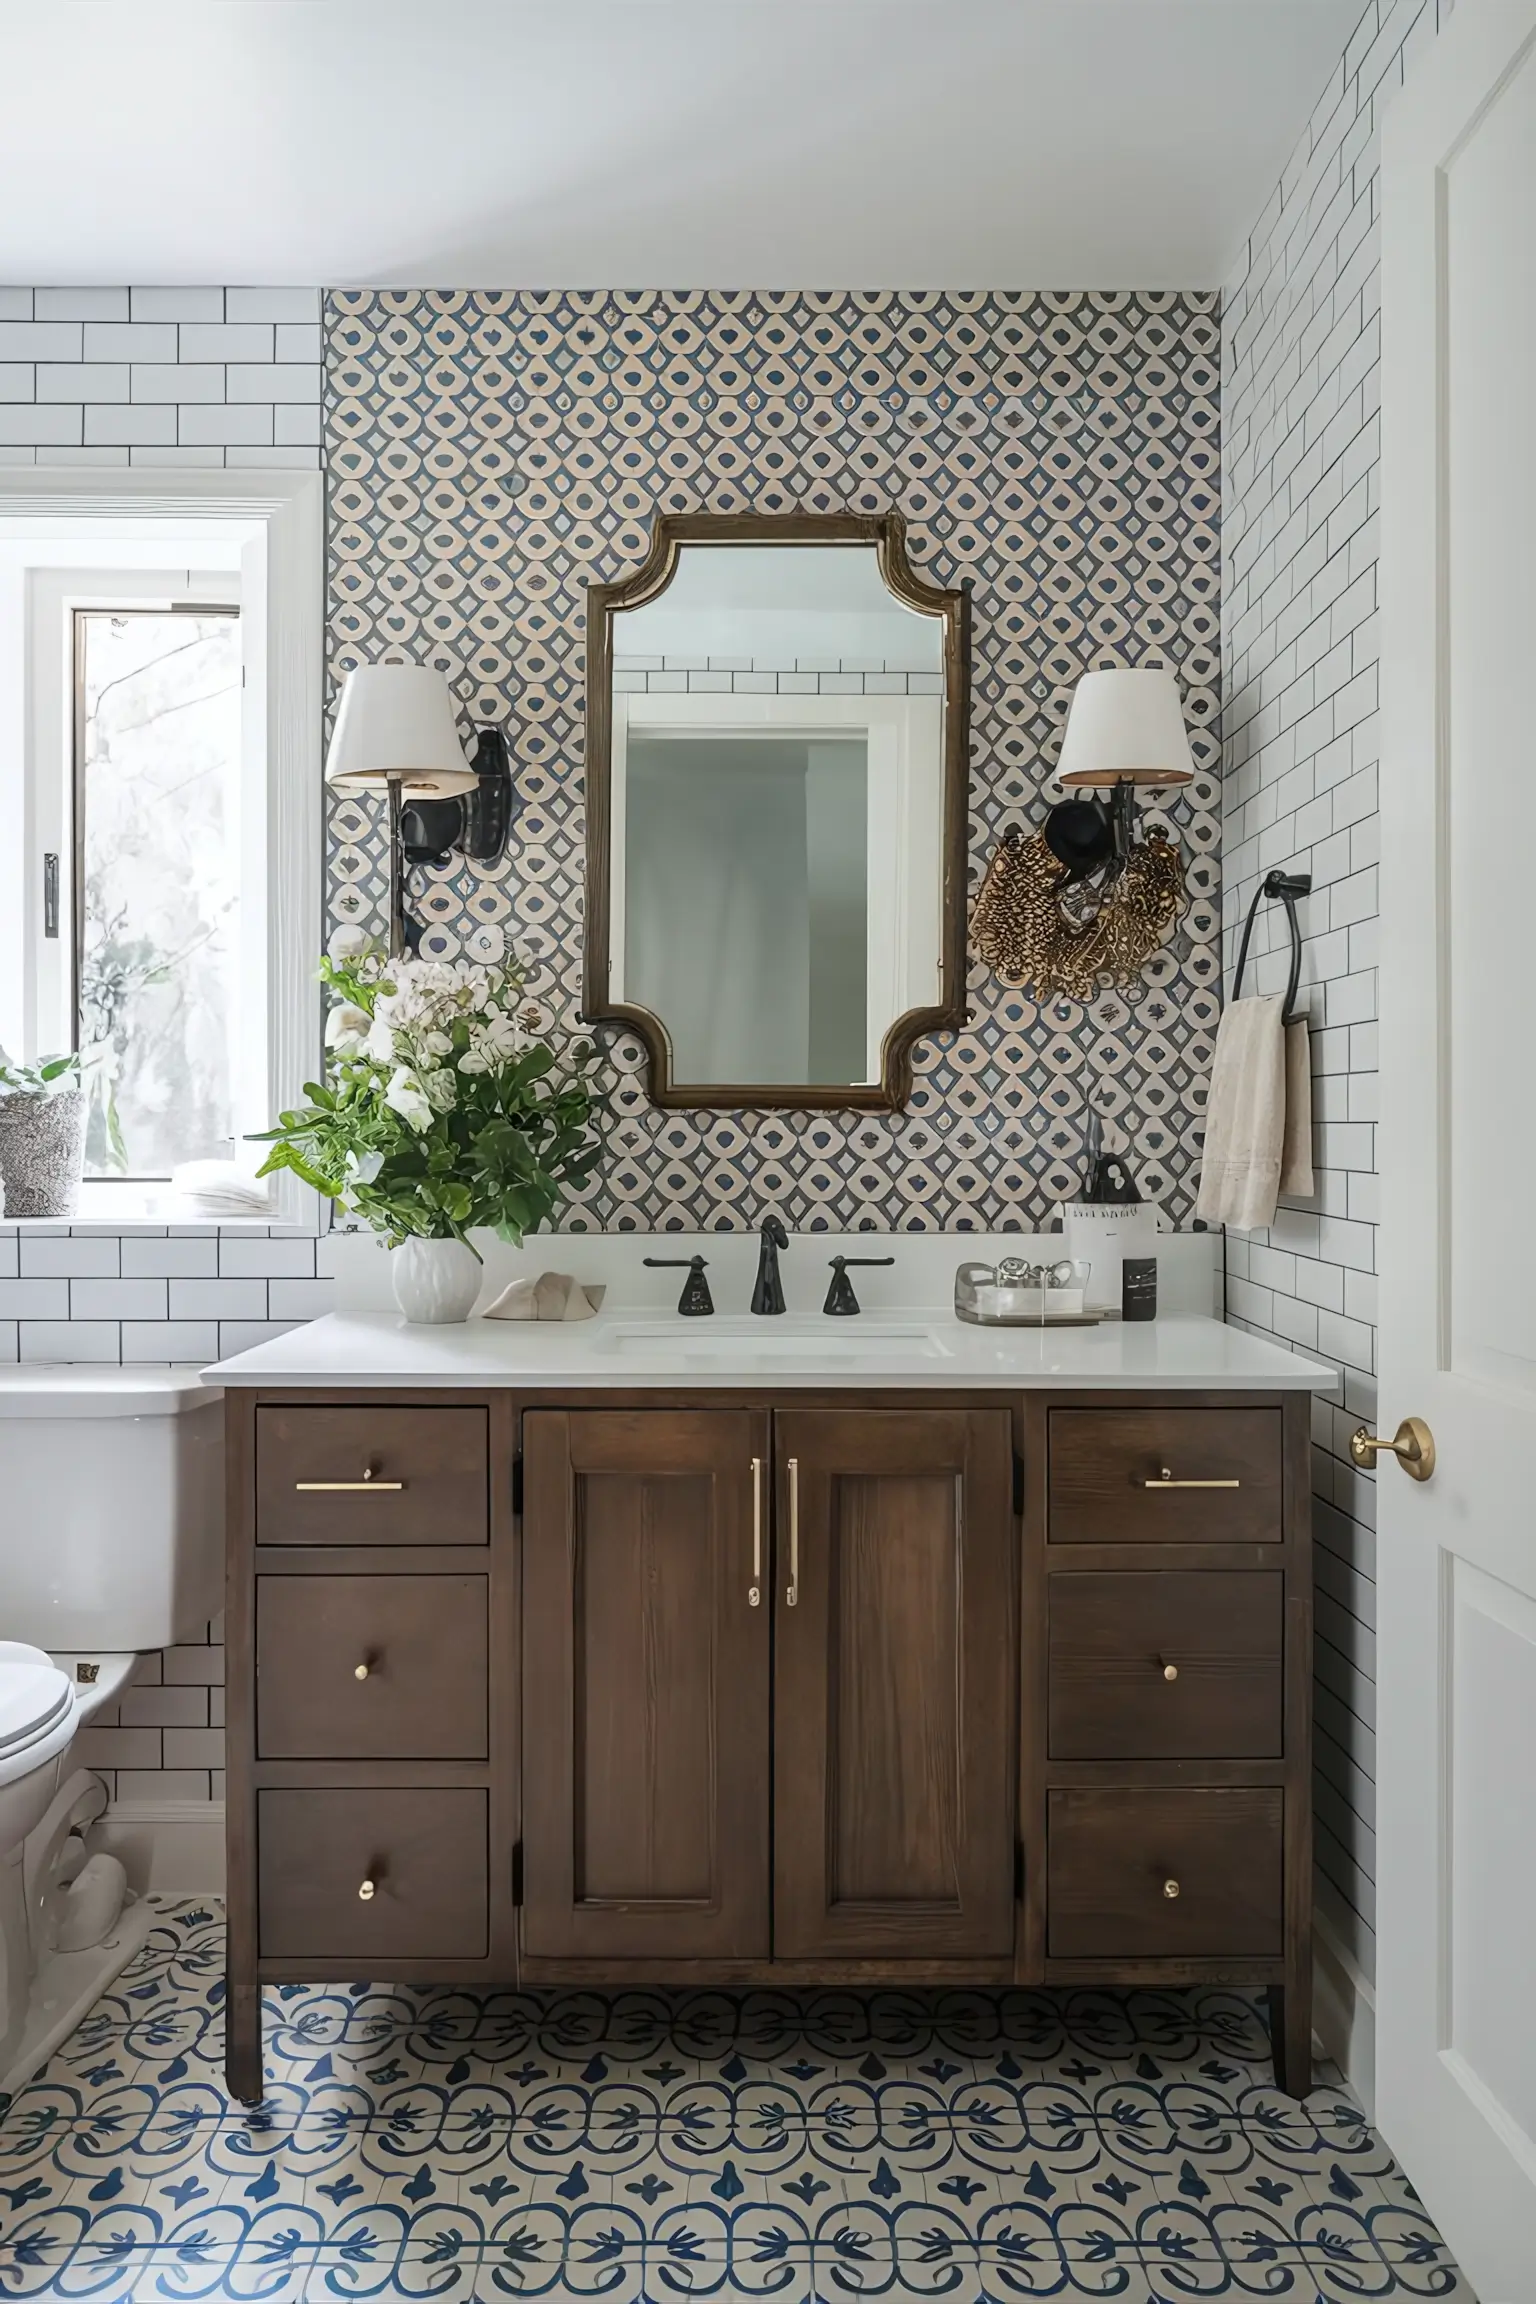 Bathroom remodel with classic subway tiles and intricate mosaic patterns.